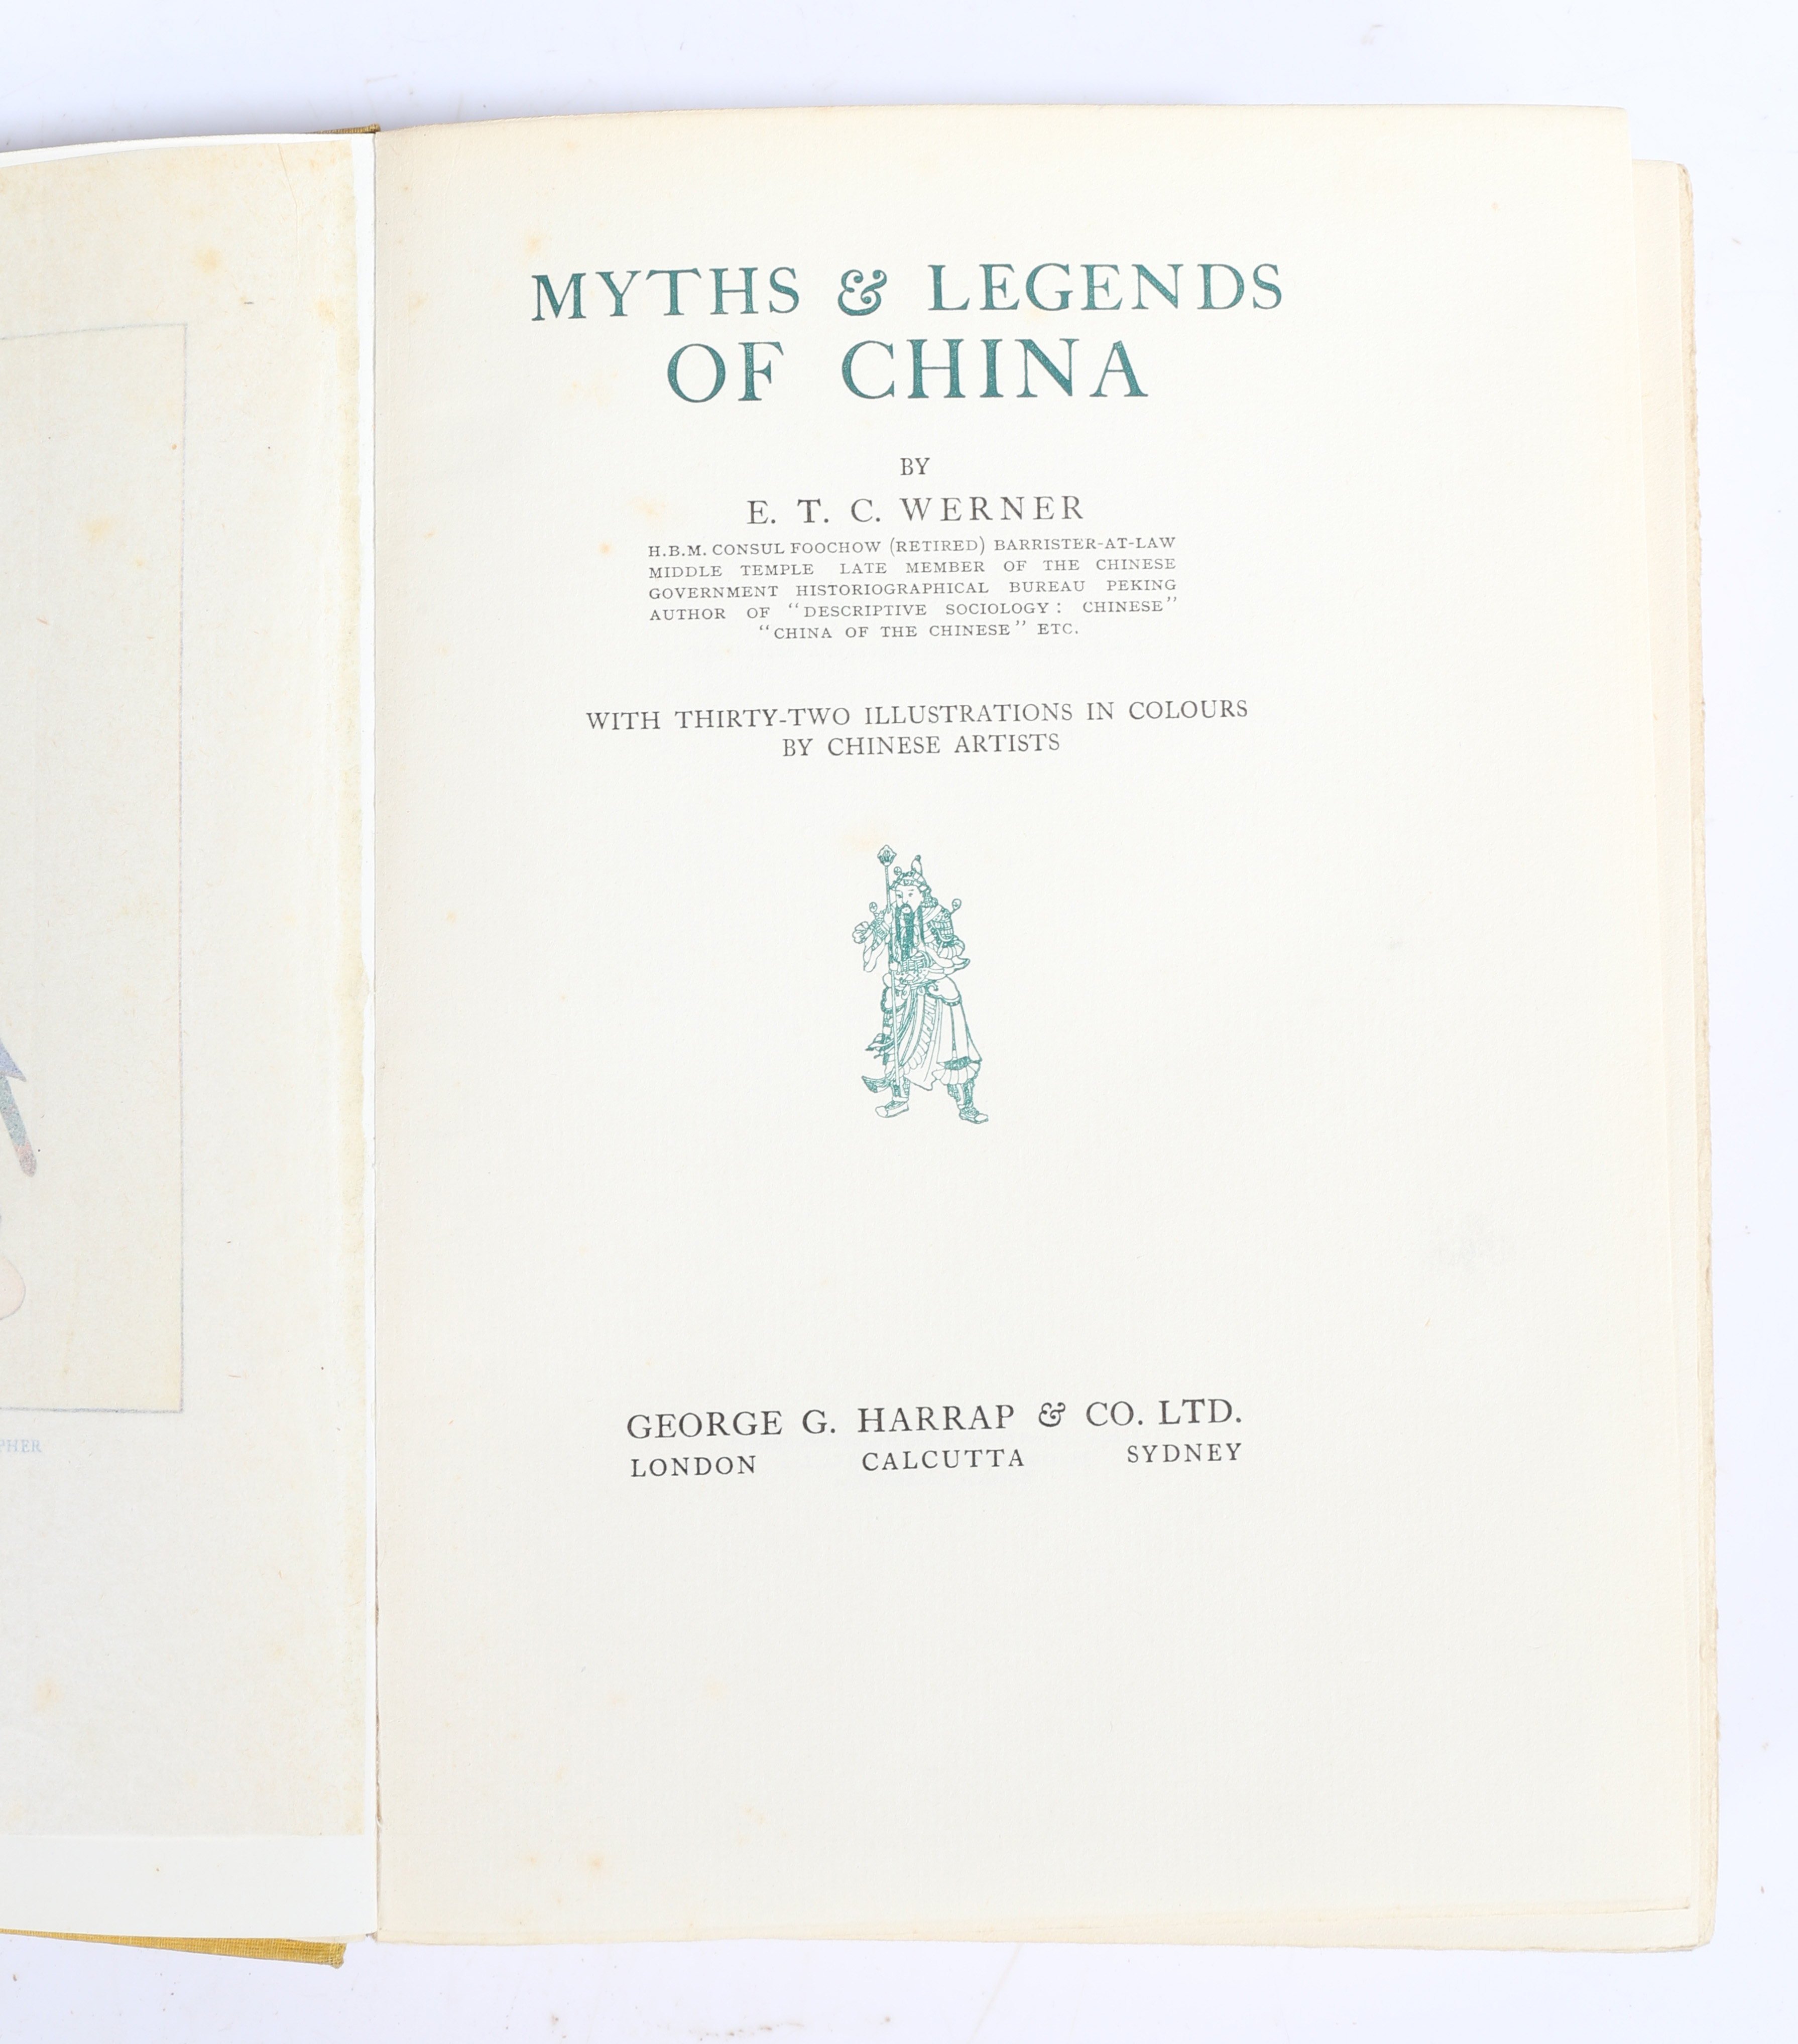 E. T. C. Werner "Myths And Legends Of China" first edition published by George G. Harrap & Co Ltd - Image 7 of 7